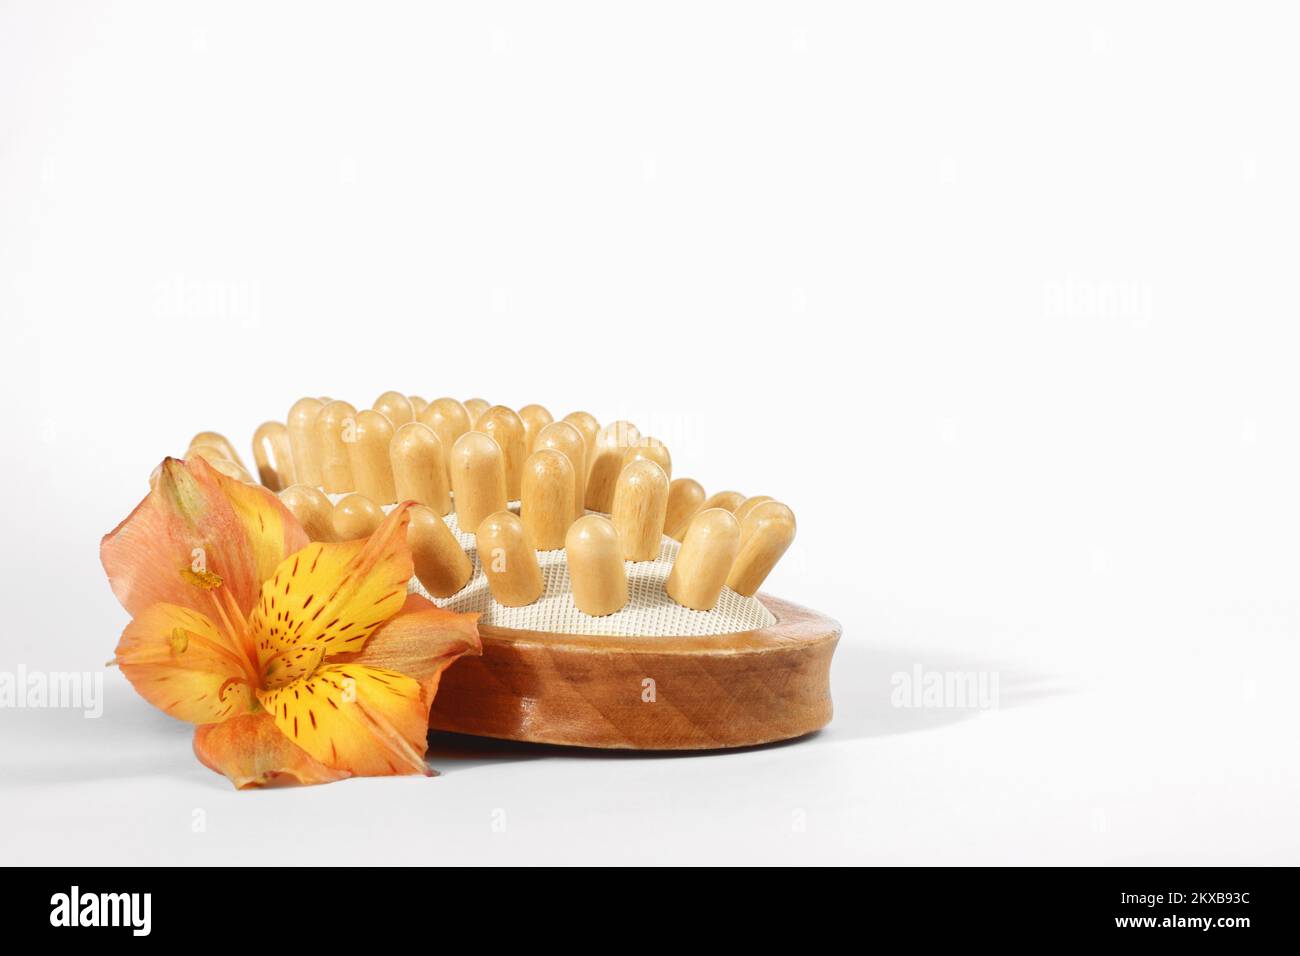 Wooden brush for anti-cellulite massage of the skin, with flowers, isolated on a white background. Copy space Stock Photo